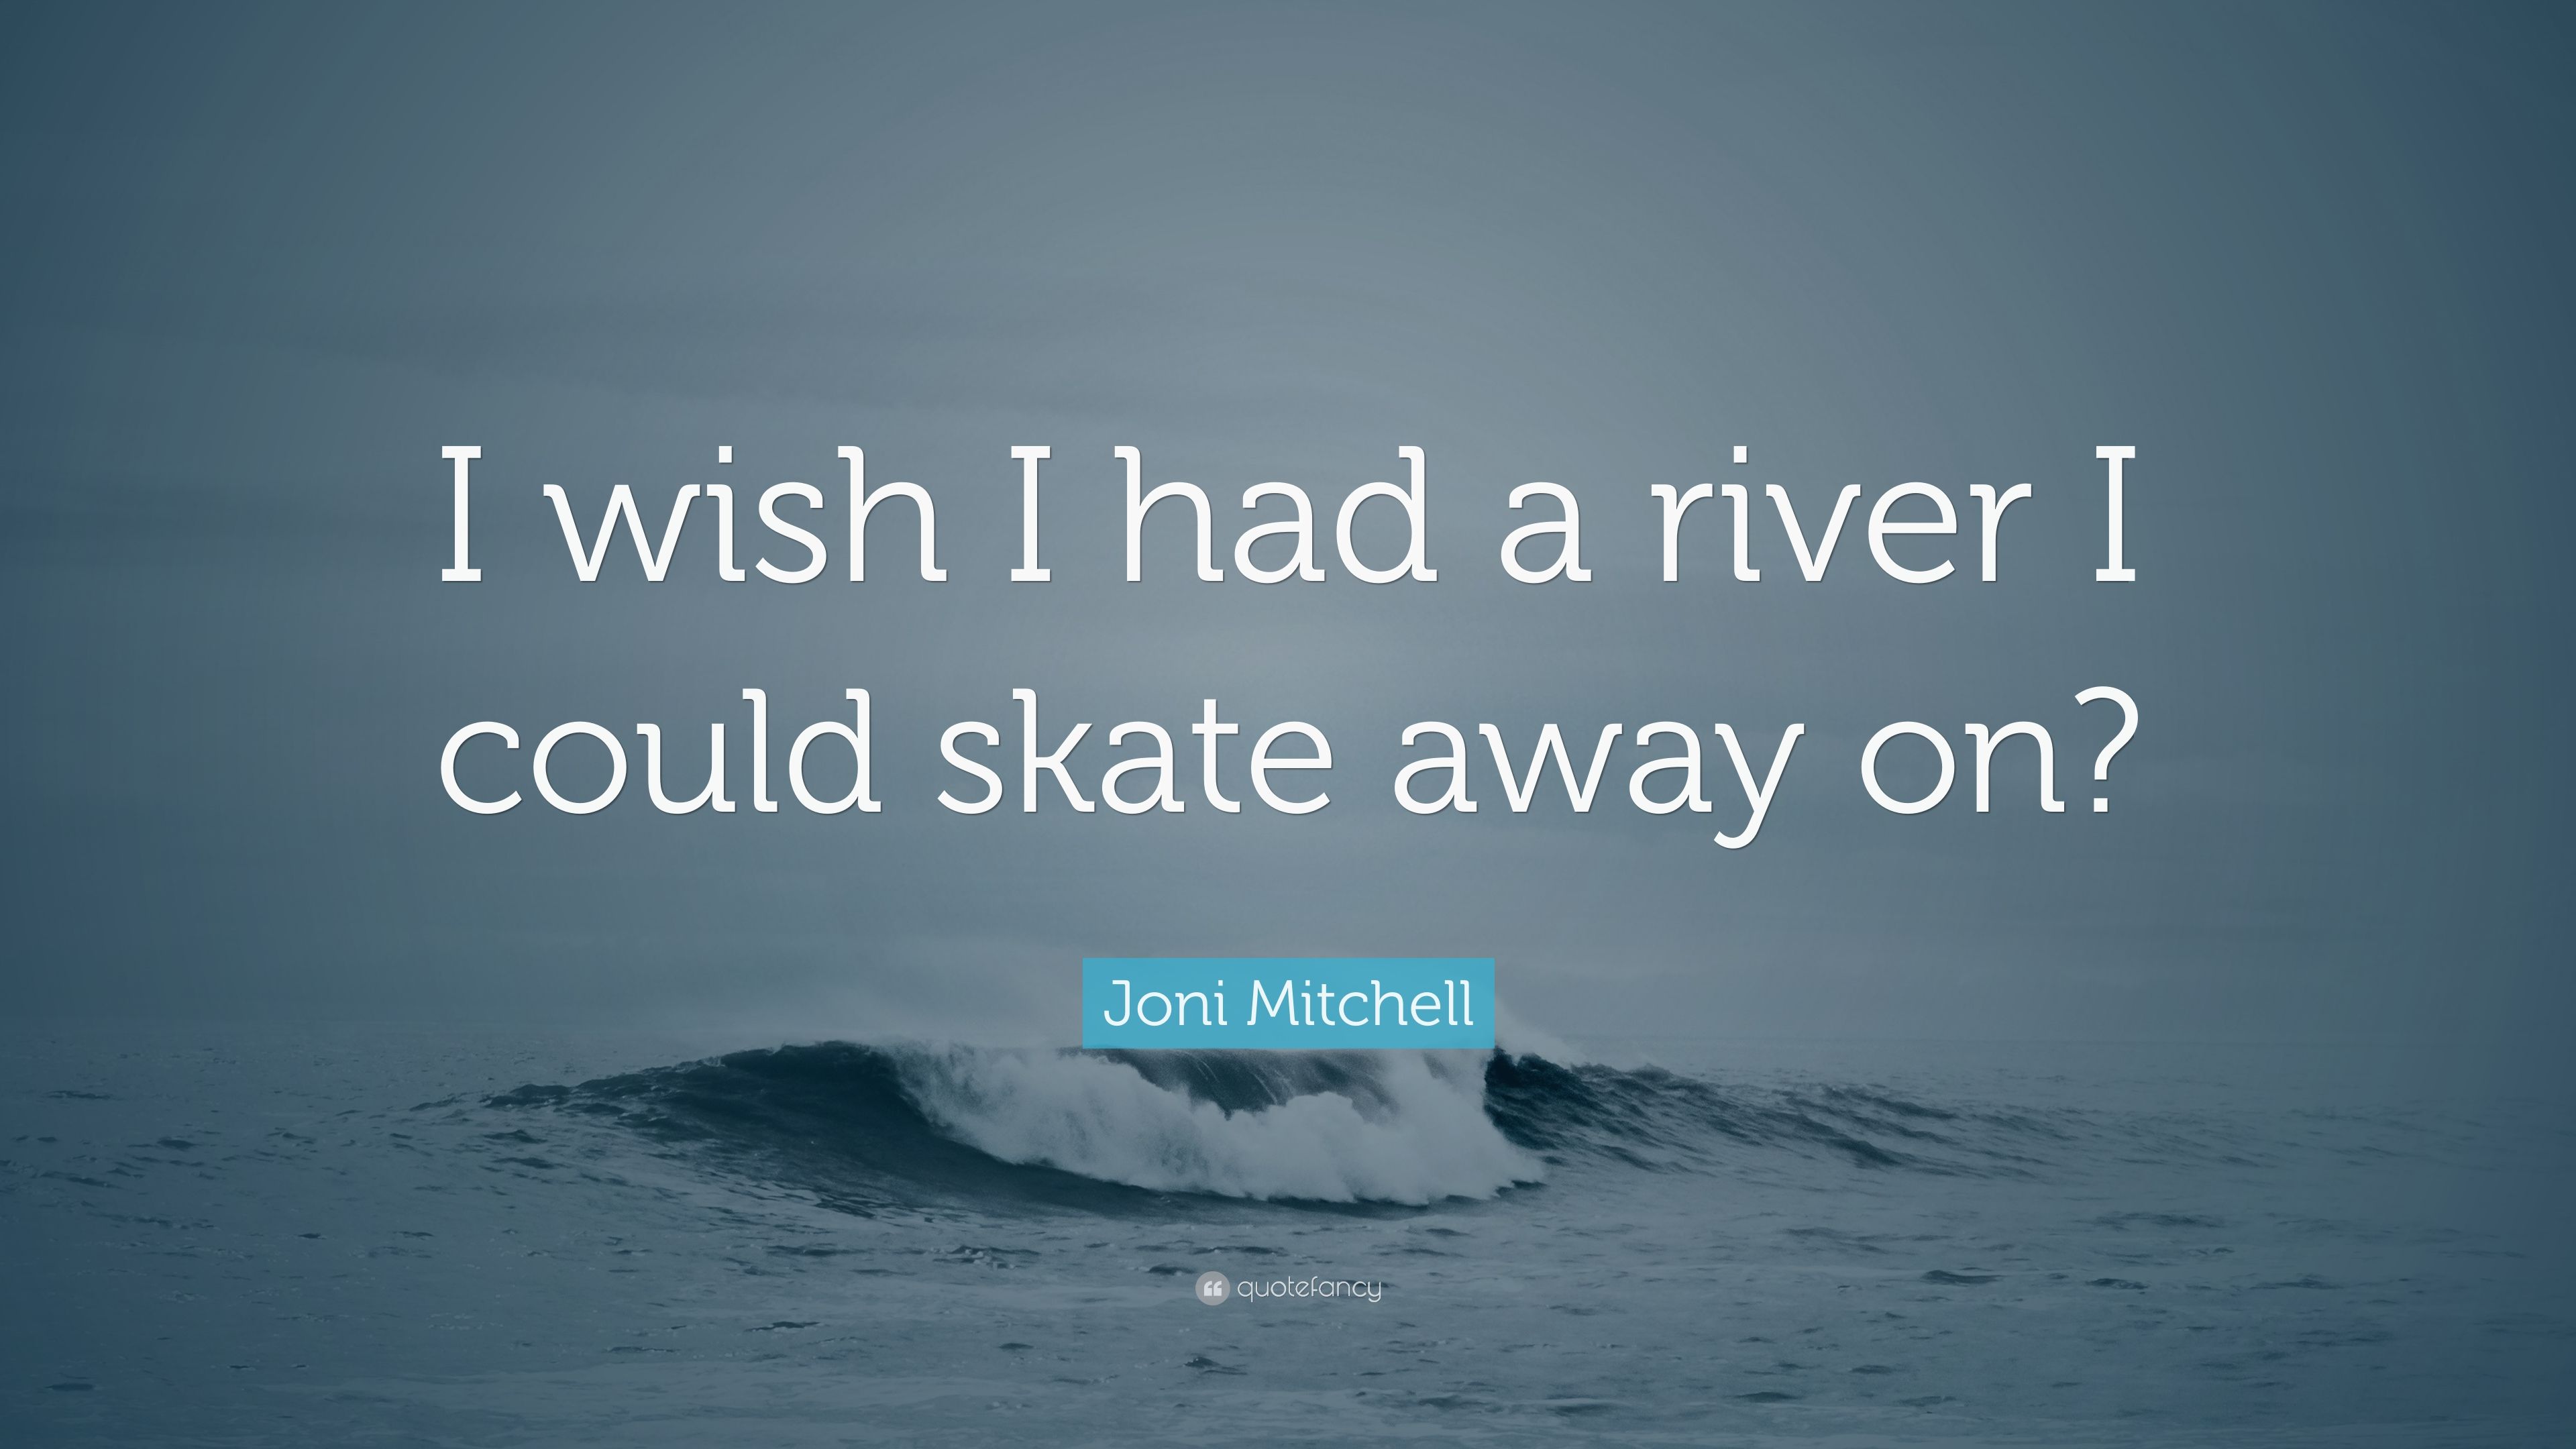 I wish I had a river I could skate away .quotefancy.com